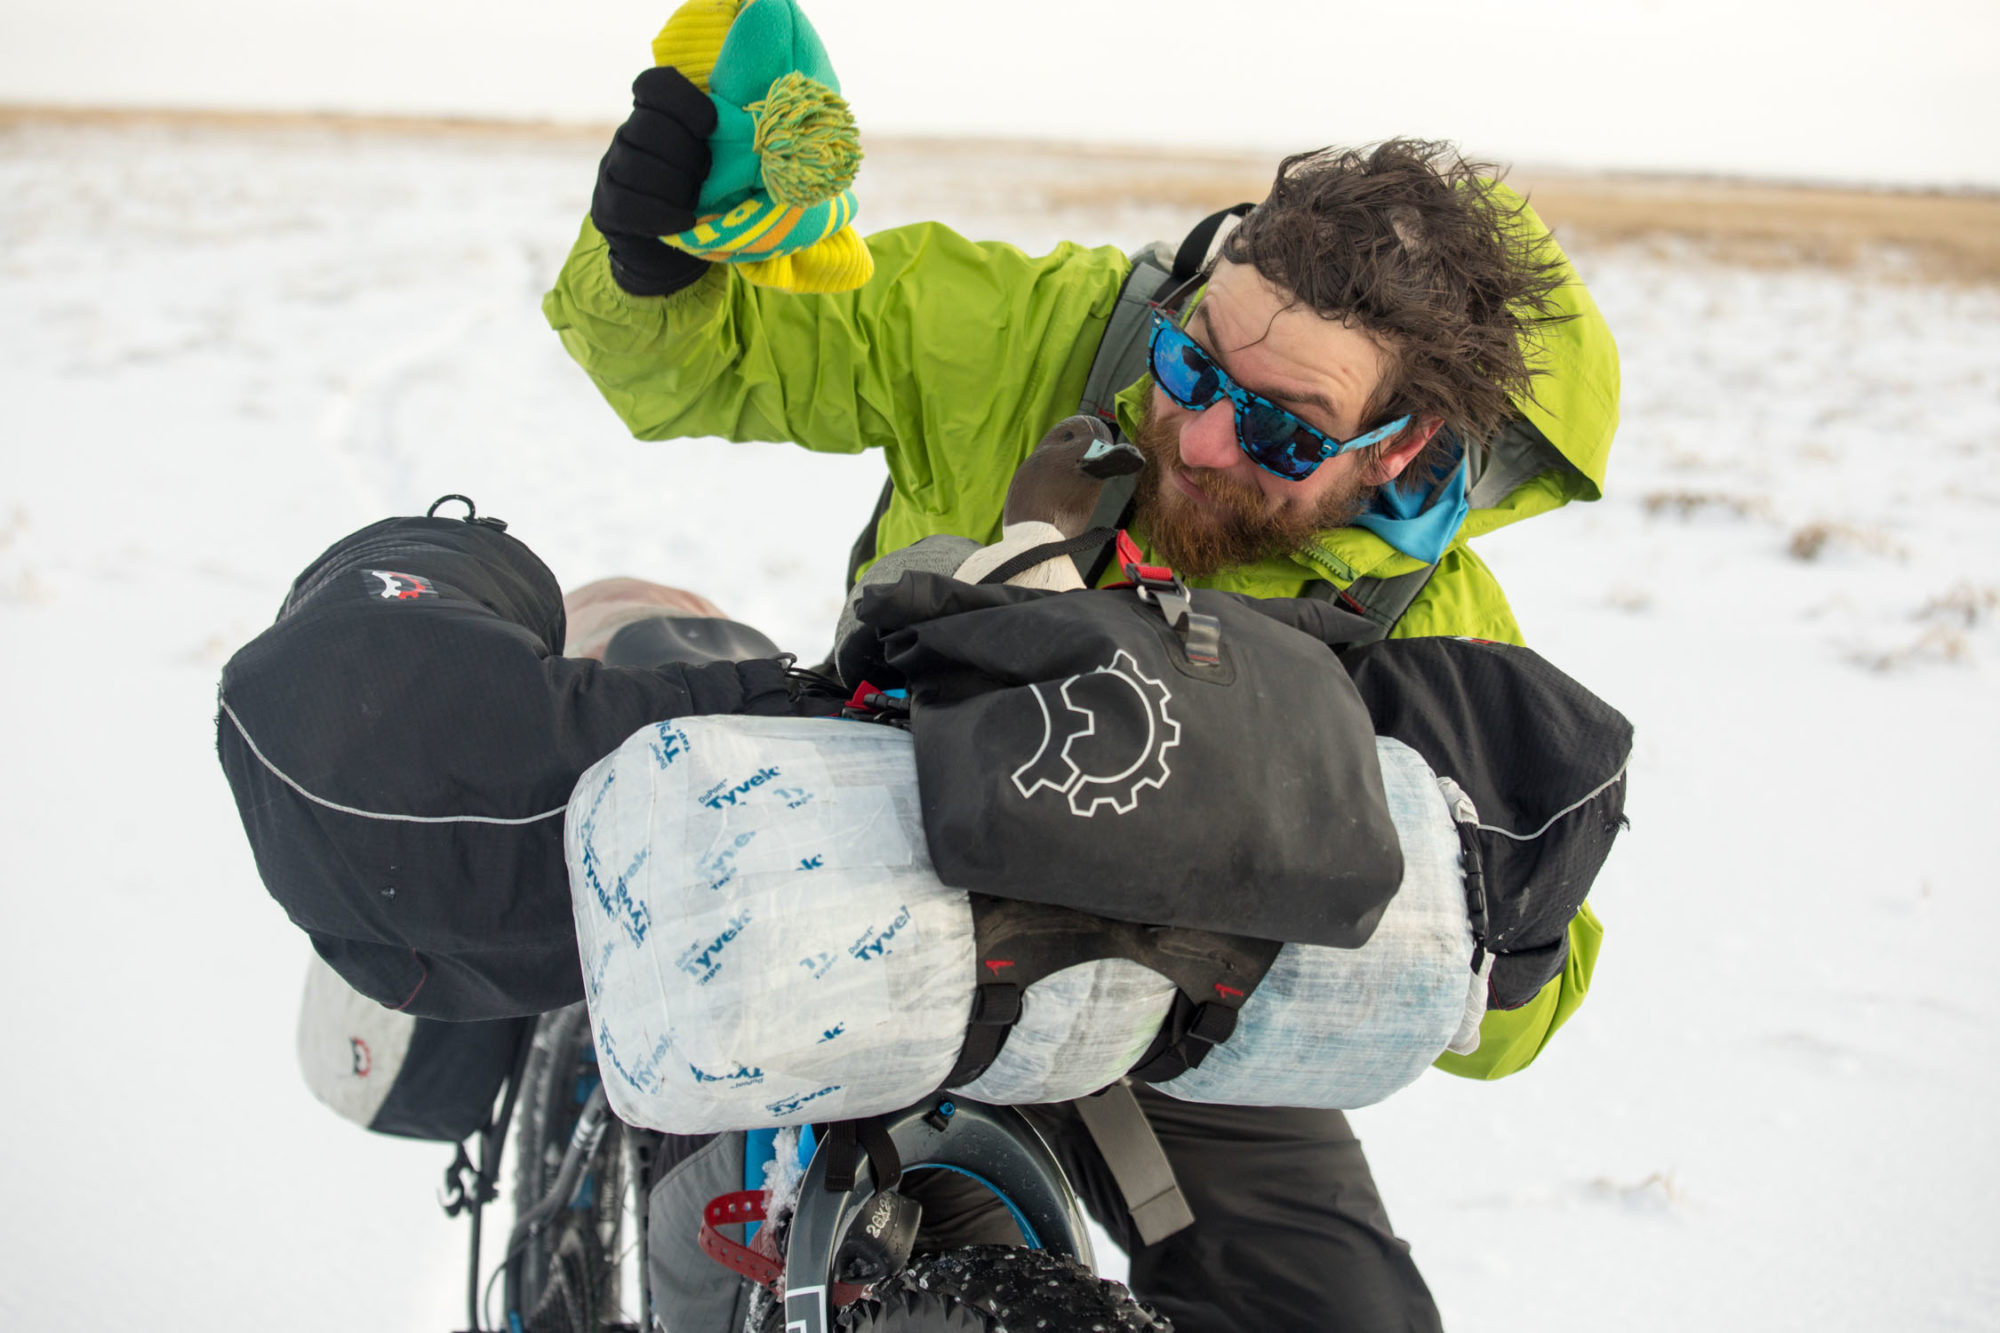 bikepacking Alaska, journey to the middle of nowhere